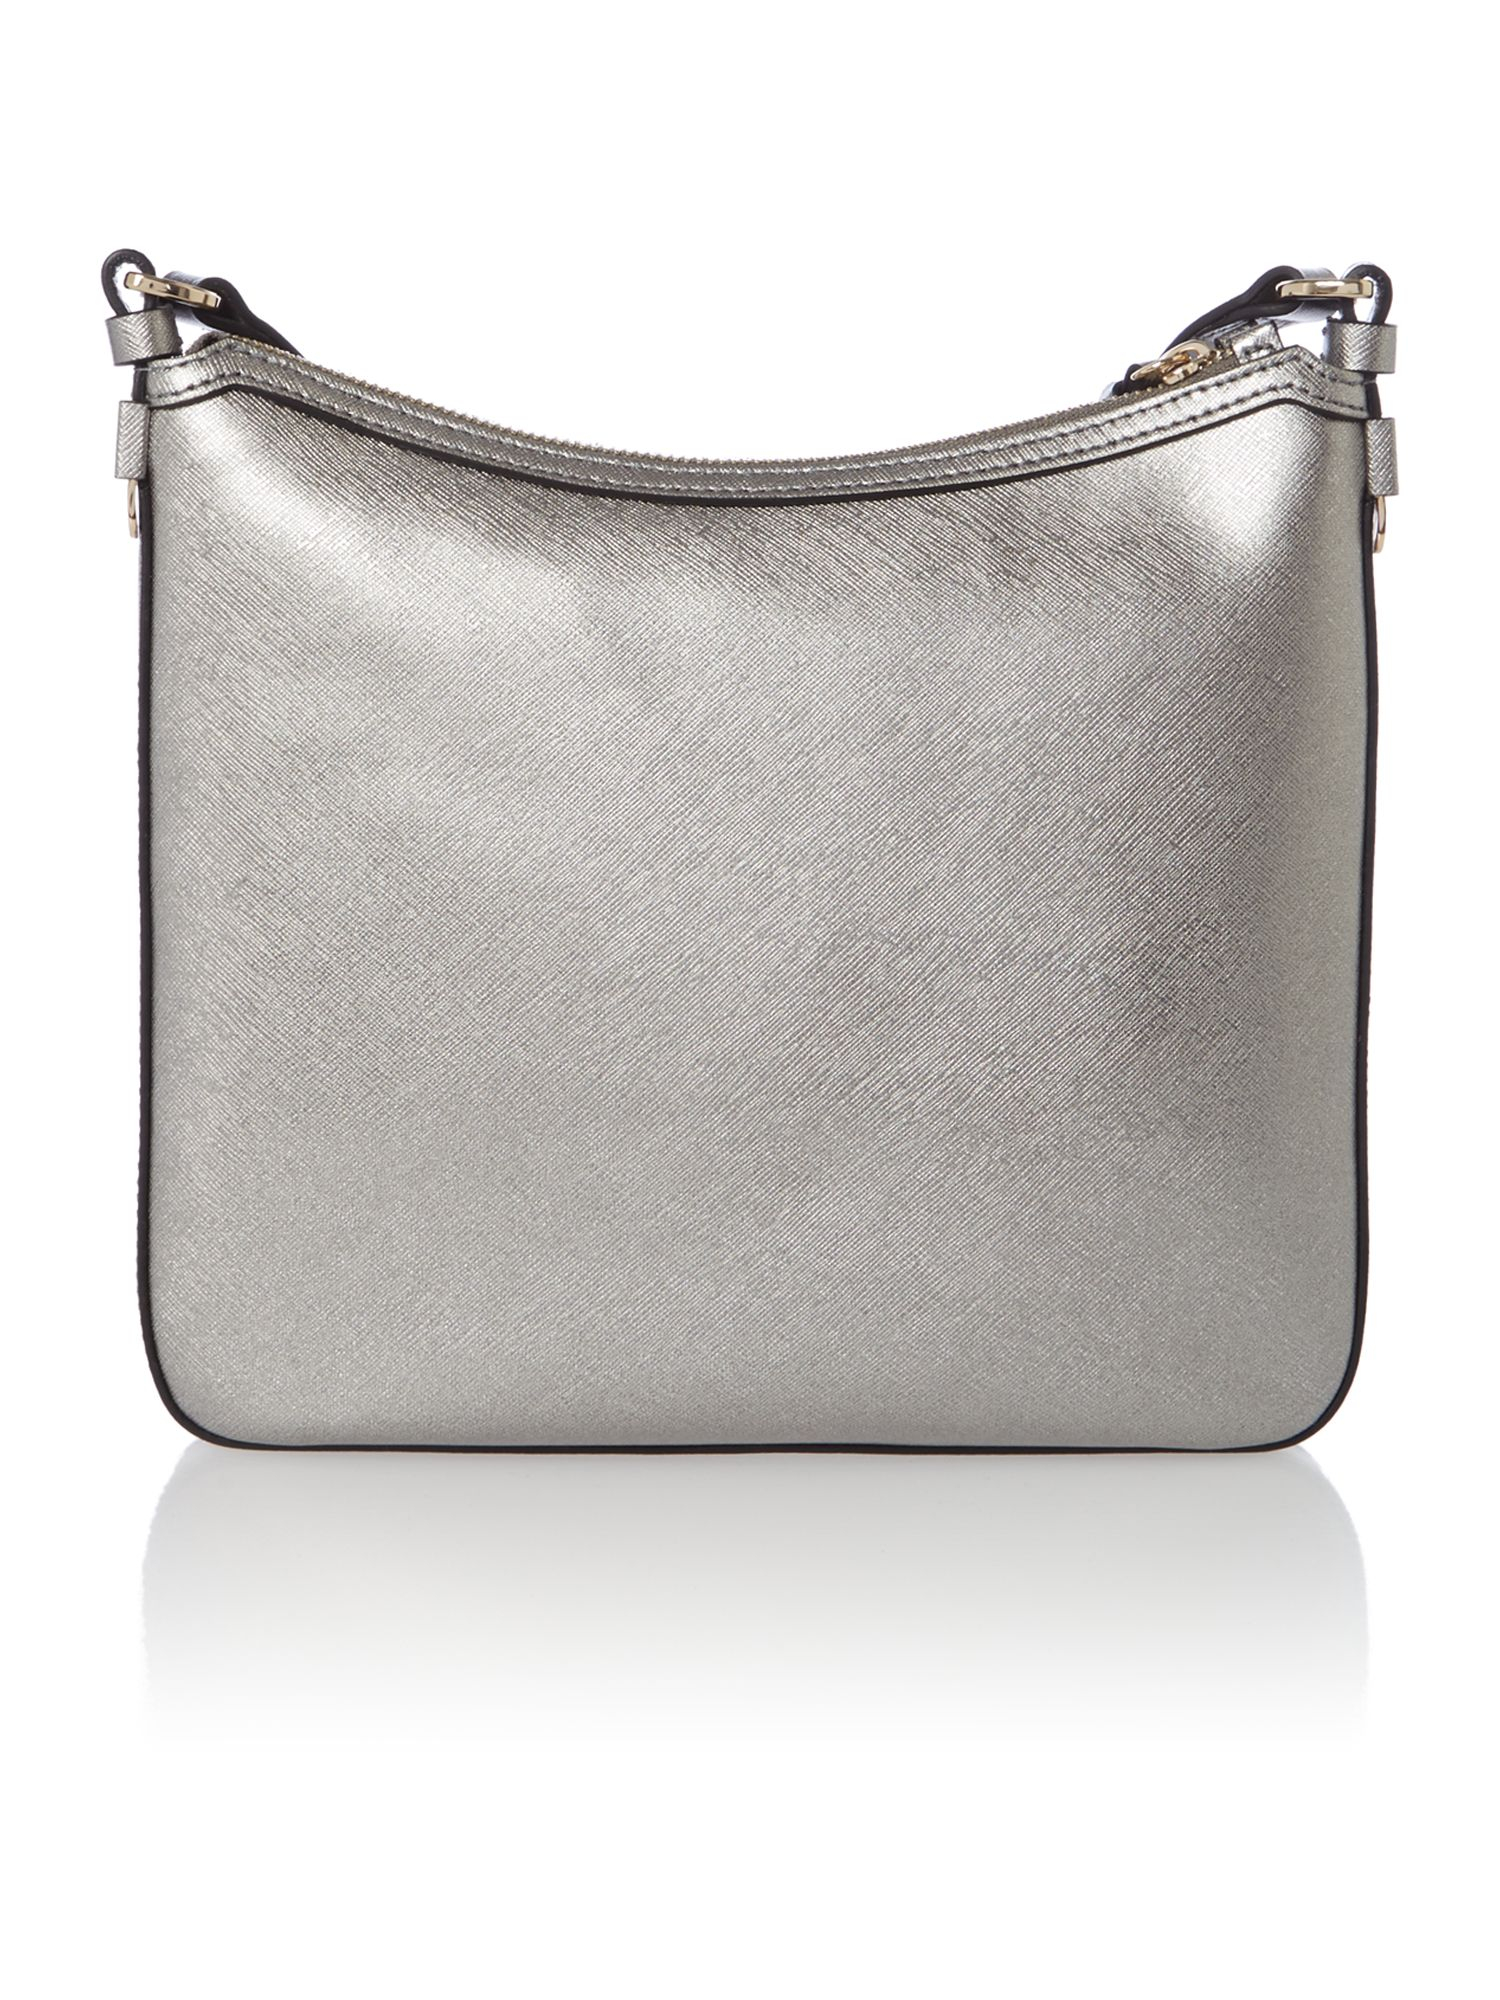 Coccinelle Silver Exclusive Cross Body Bag in Silver | Lyst